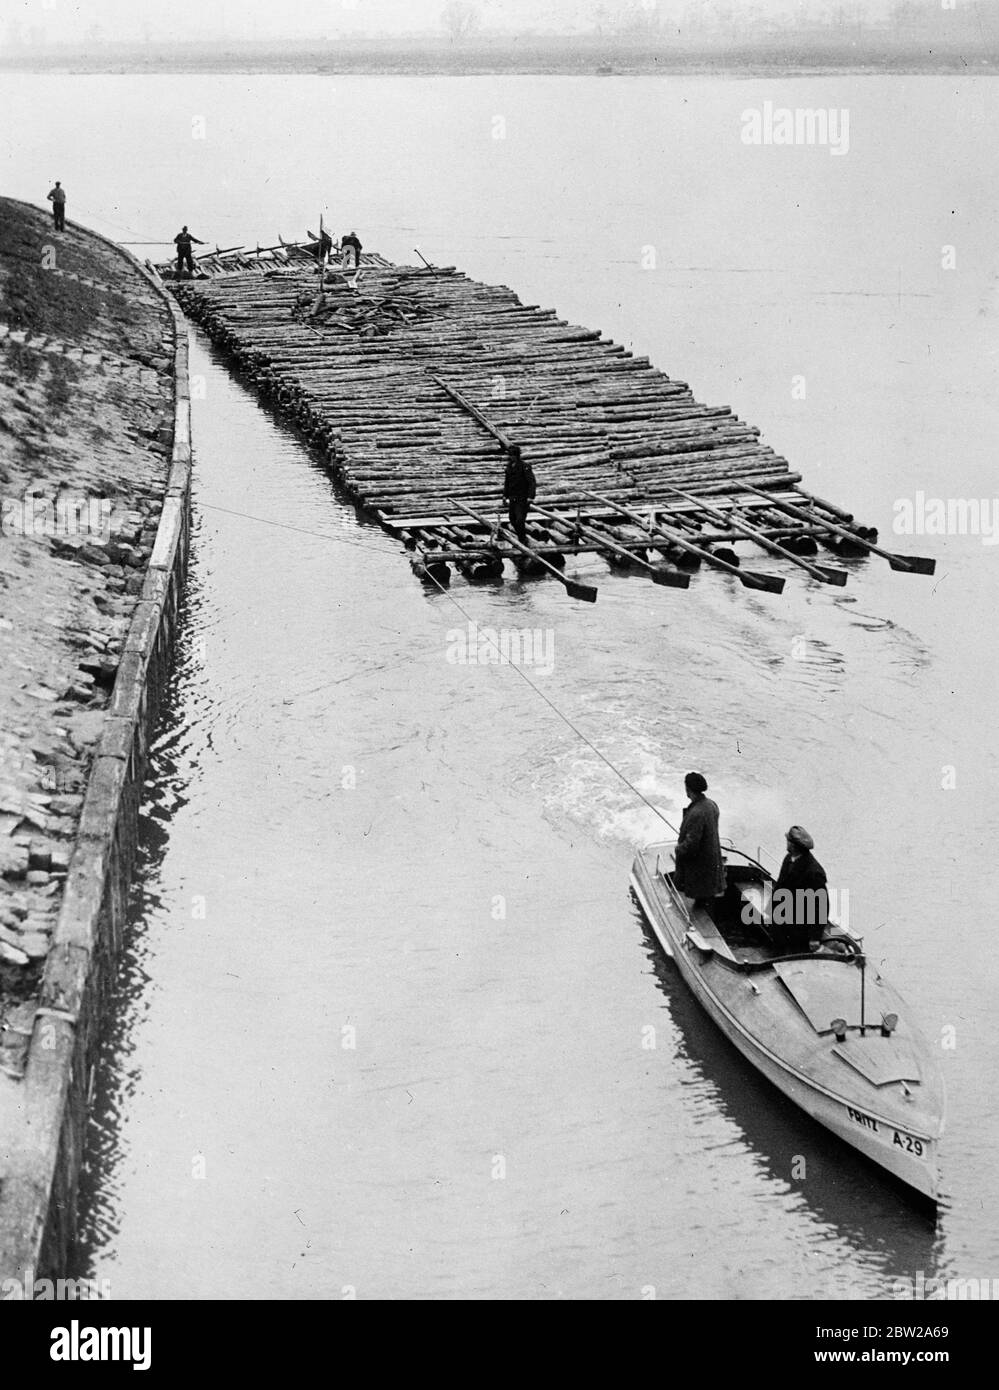 Island of timber on the Danube. The biggest timber raft seen on the Danube for several years, floated down the river from Rossatz to Vienna. The giant raft was over 150 feet in length and about 20 feet wide. Photo shows, though raft nearing Vienna after his journey down the Danube. 29 November 1937 Stock Photo